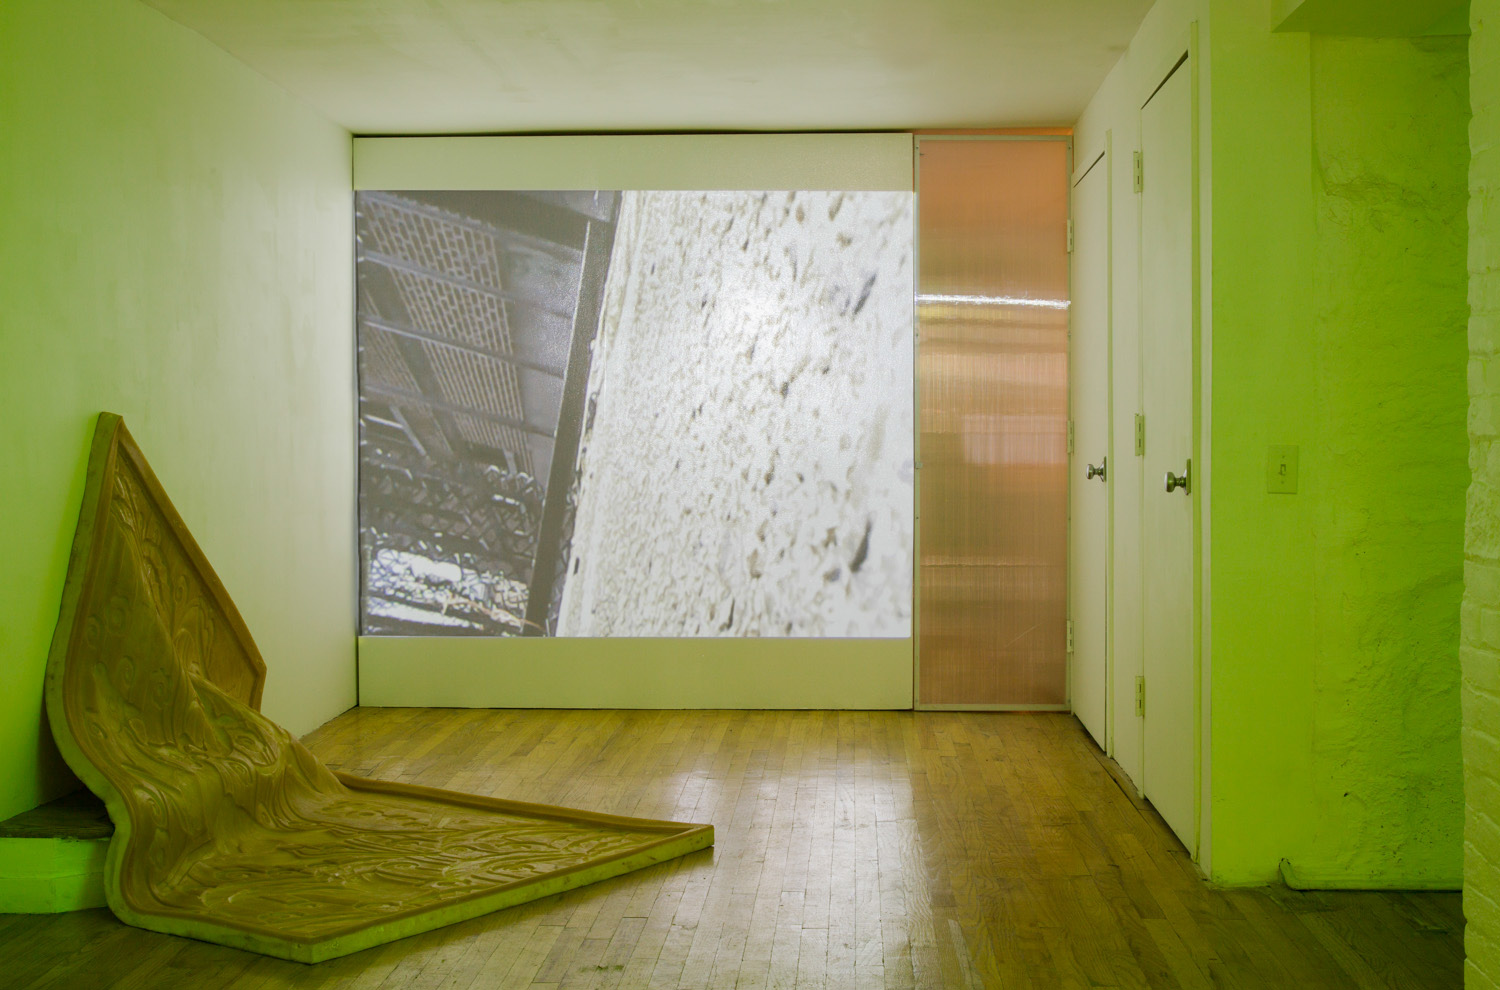  Tom Morrill and Rebecca Naegele,  No Angle of Attack , exhibition view, 321 Gallery, June 2015 